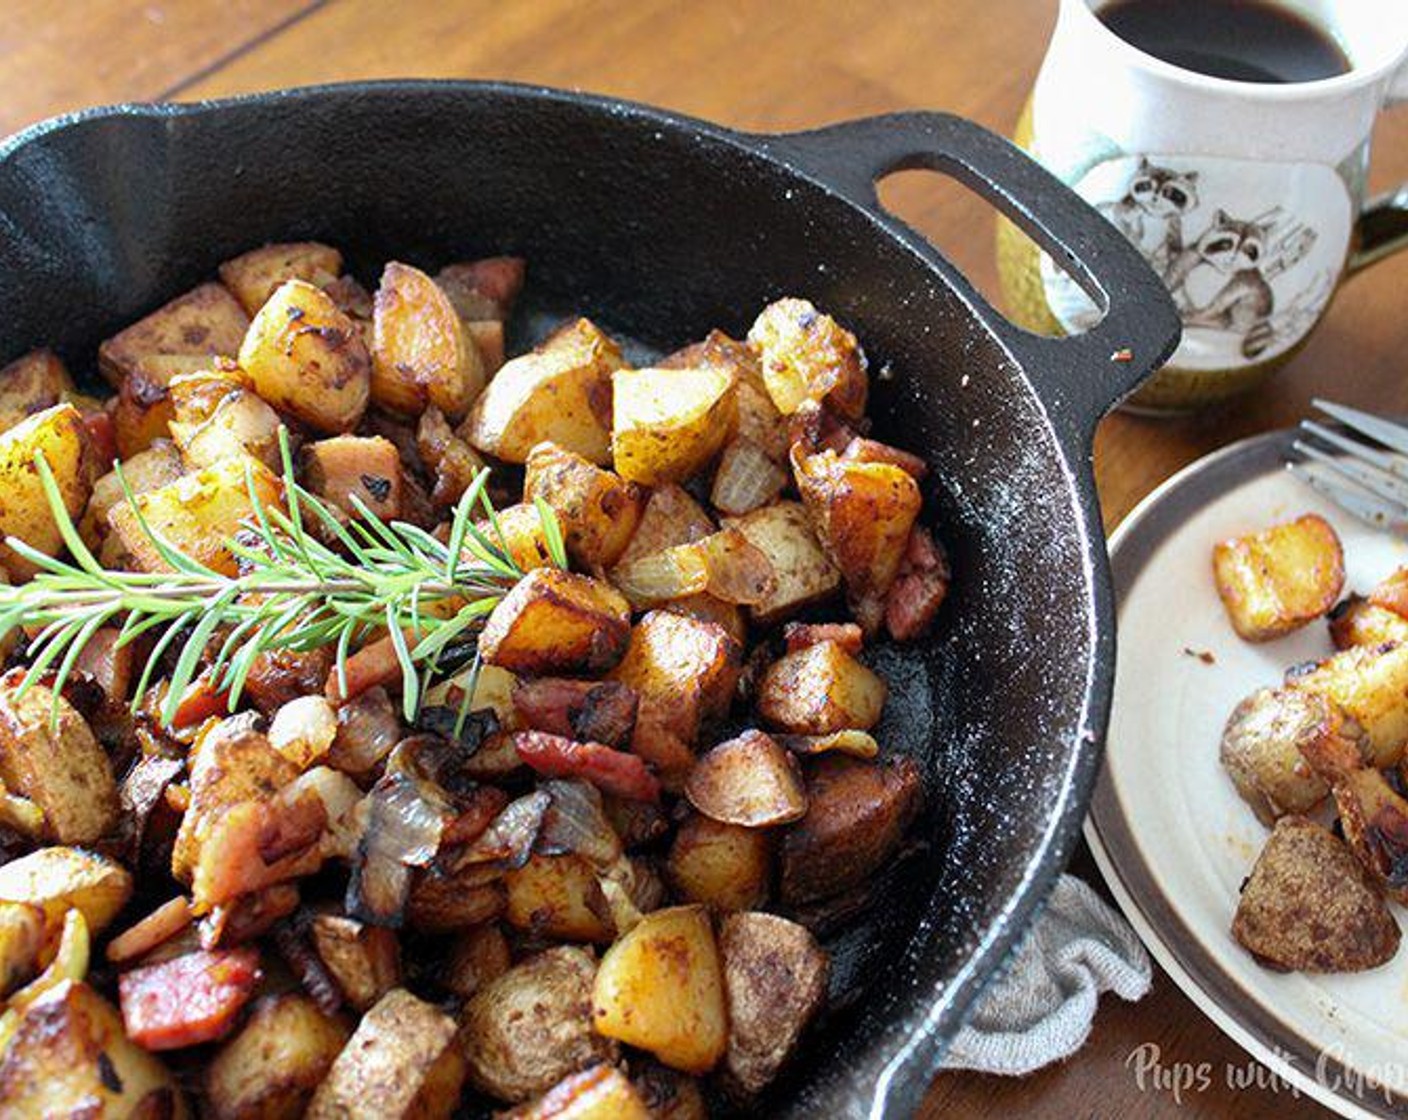 Skillet Potatoes Infused with Caramelized Onions (AKA Hangover Potatoes)